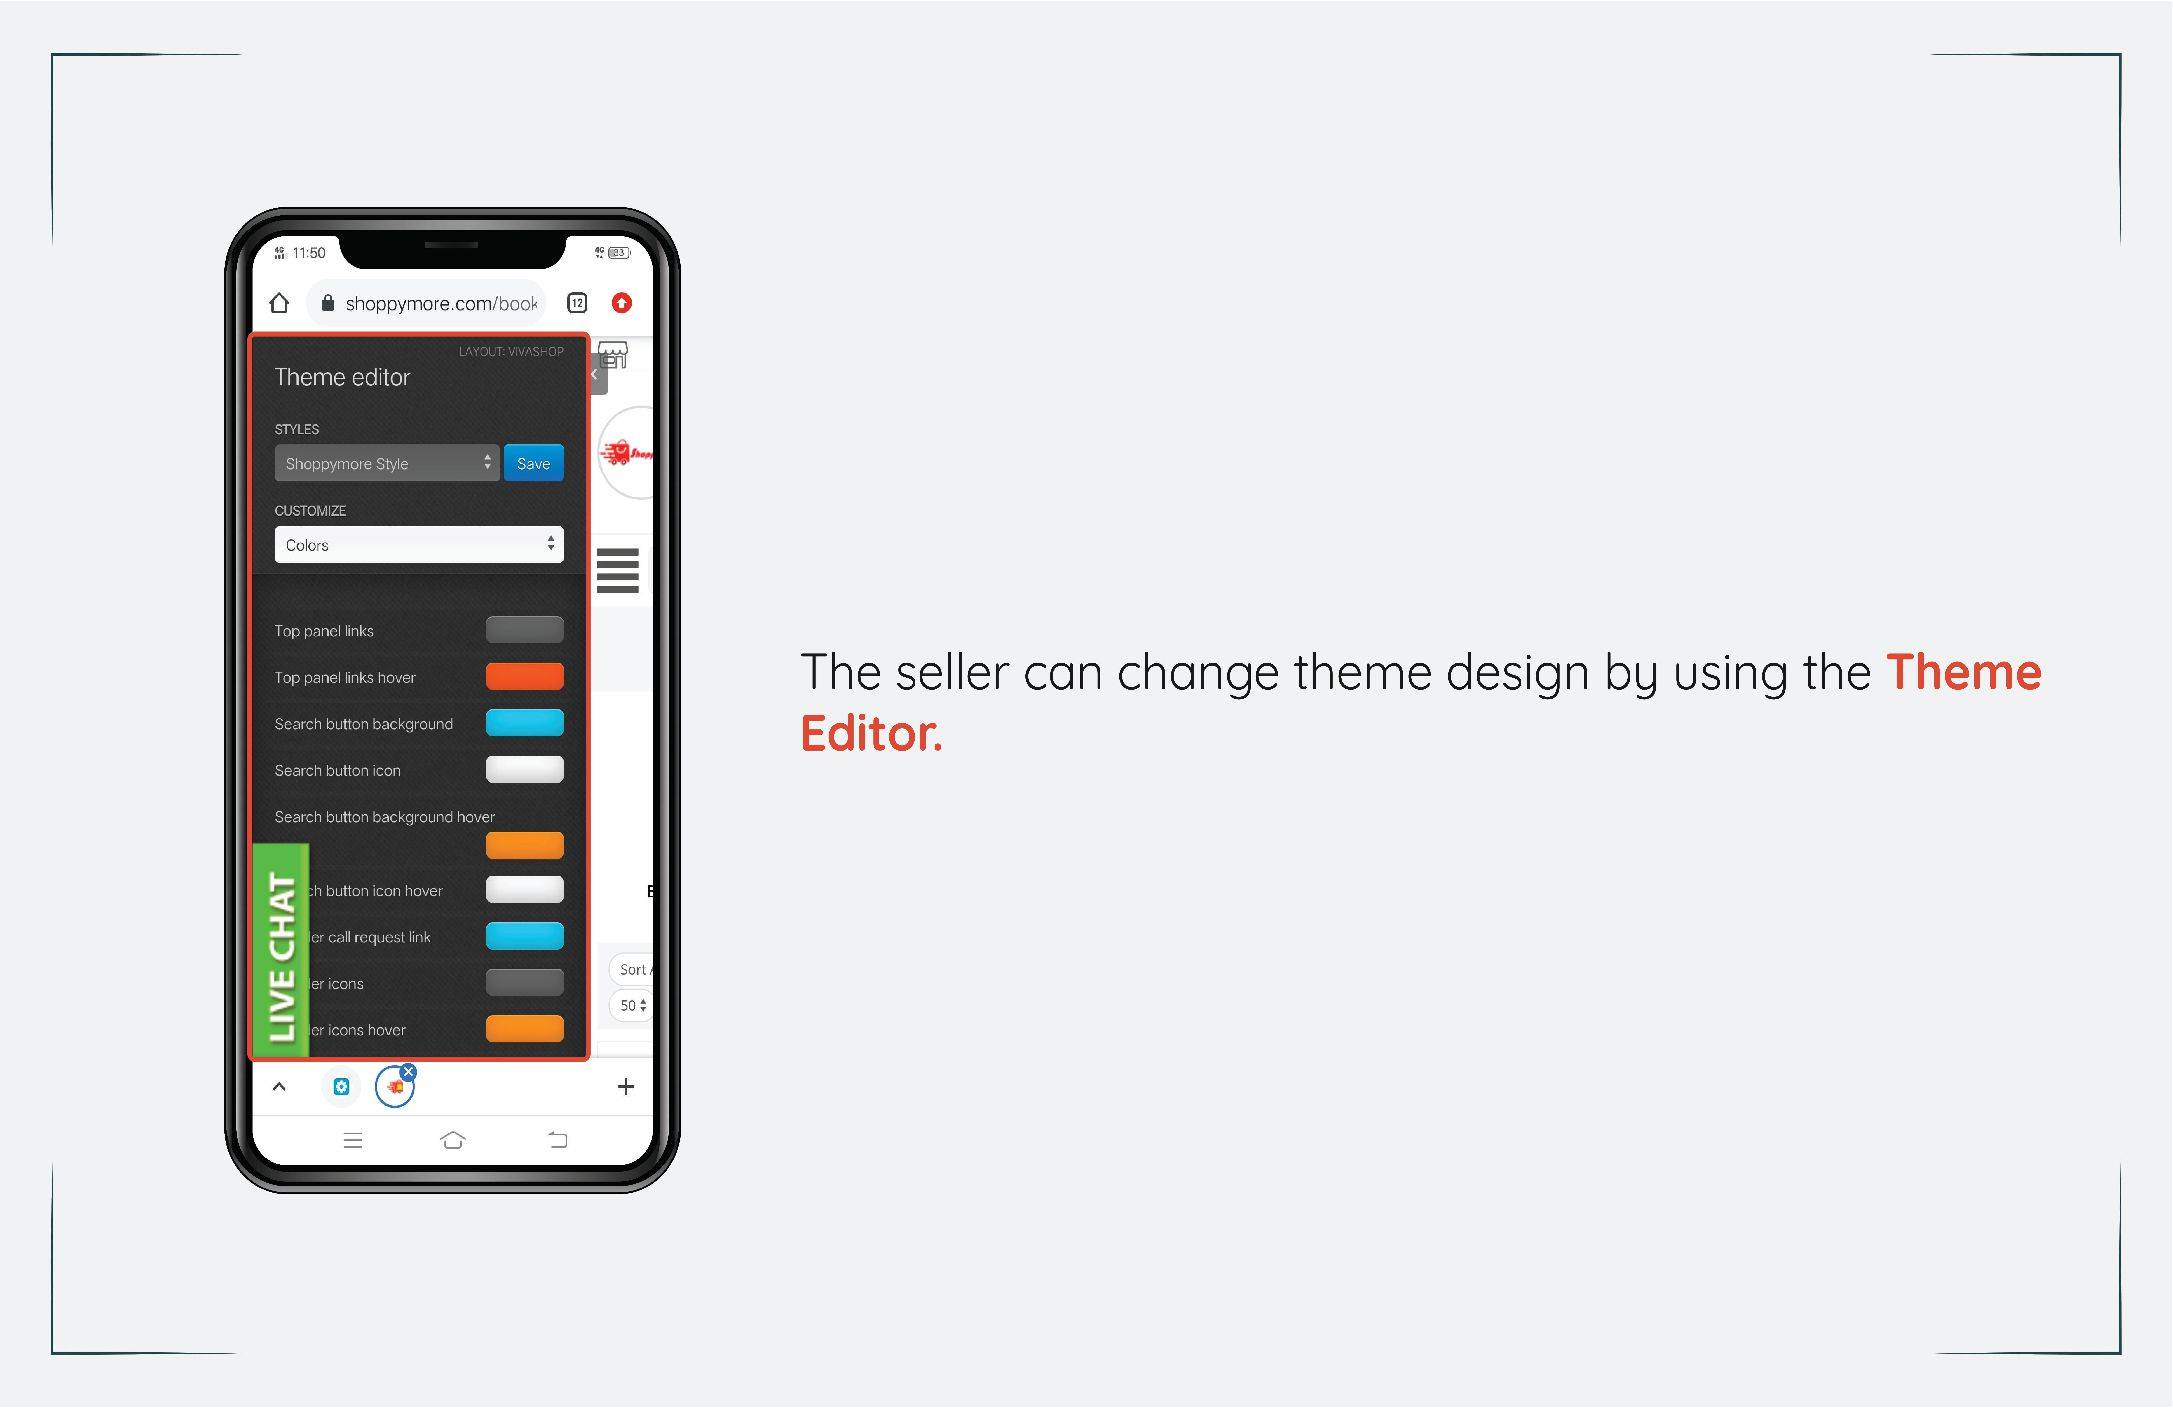 How to manage theme design using mobile 3